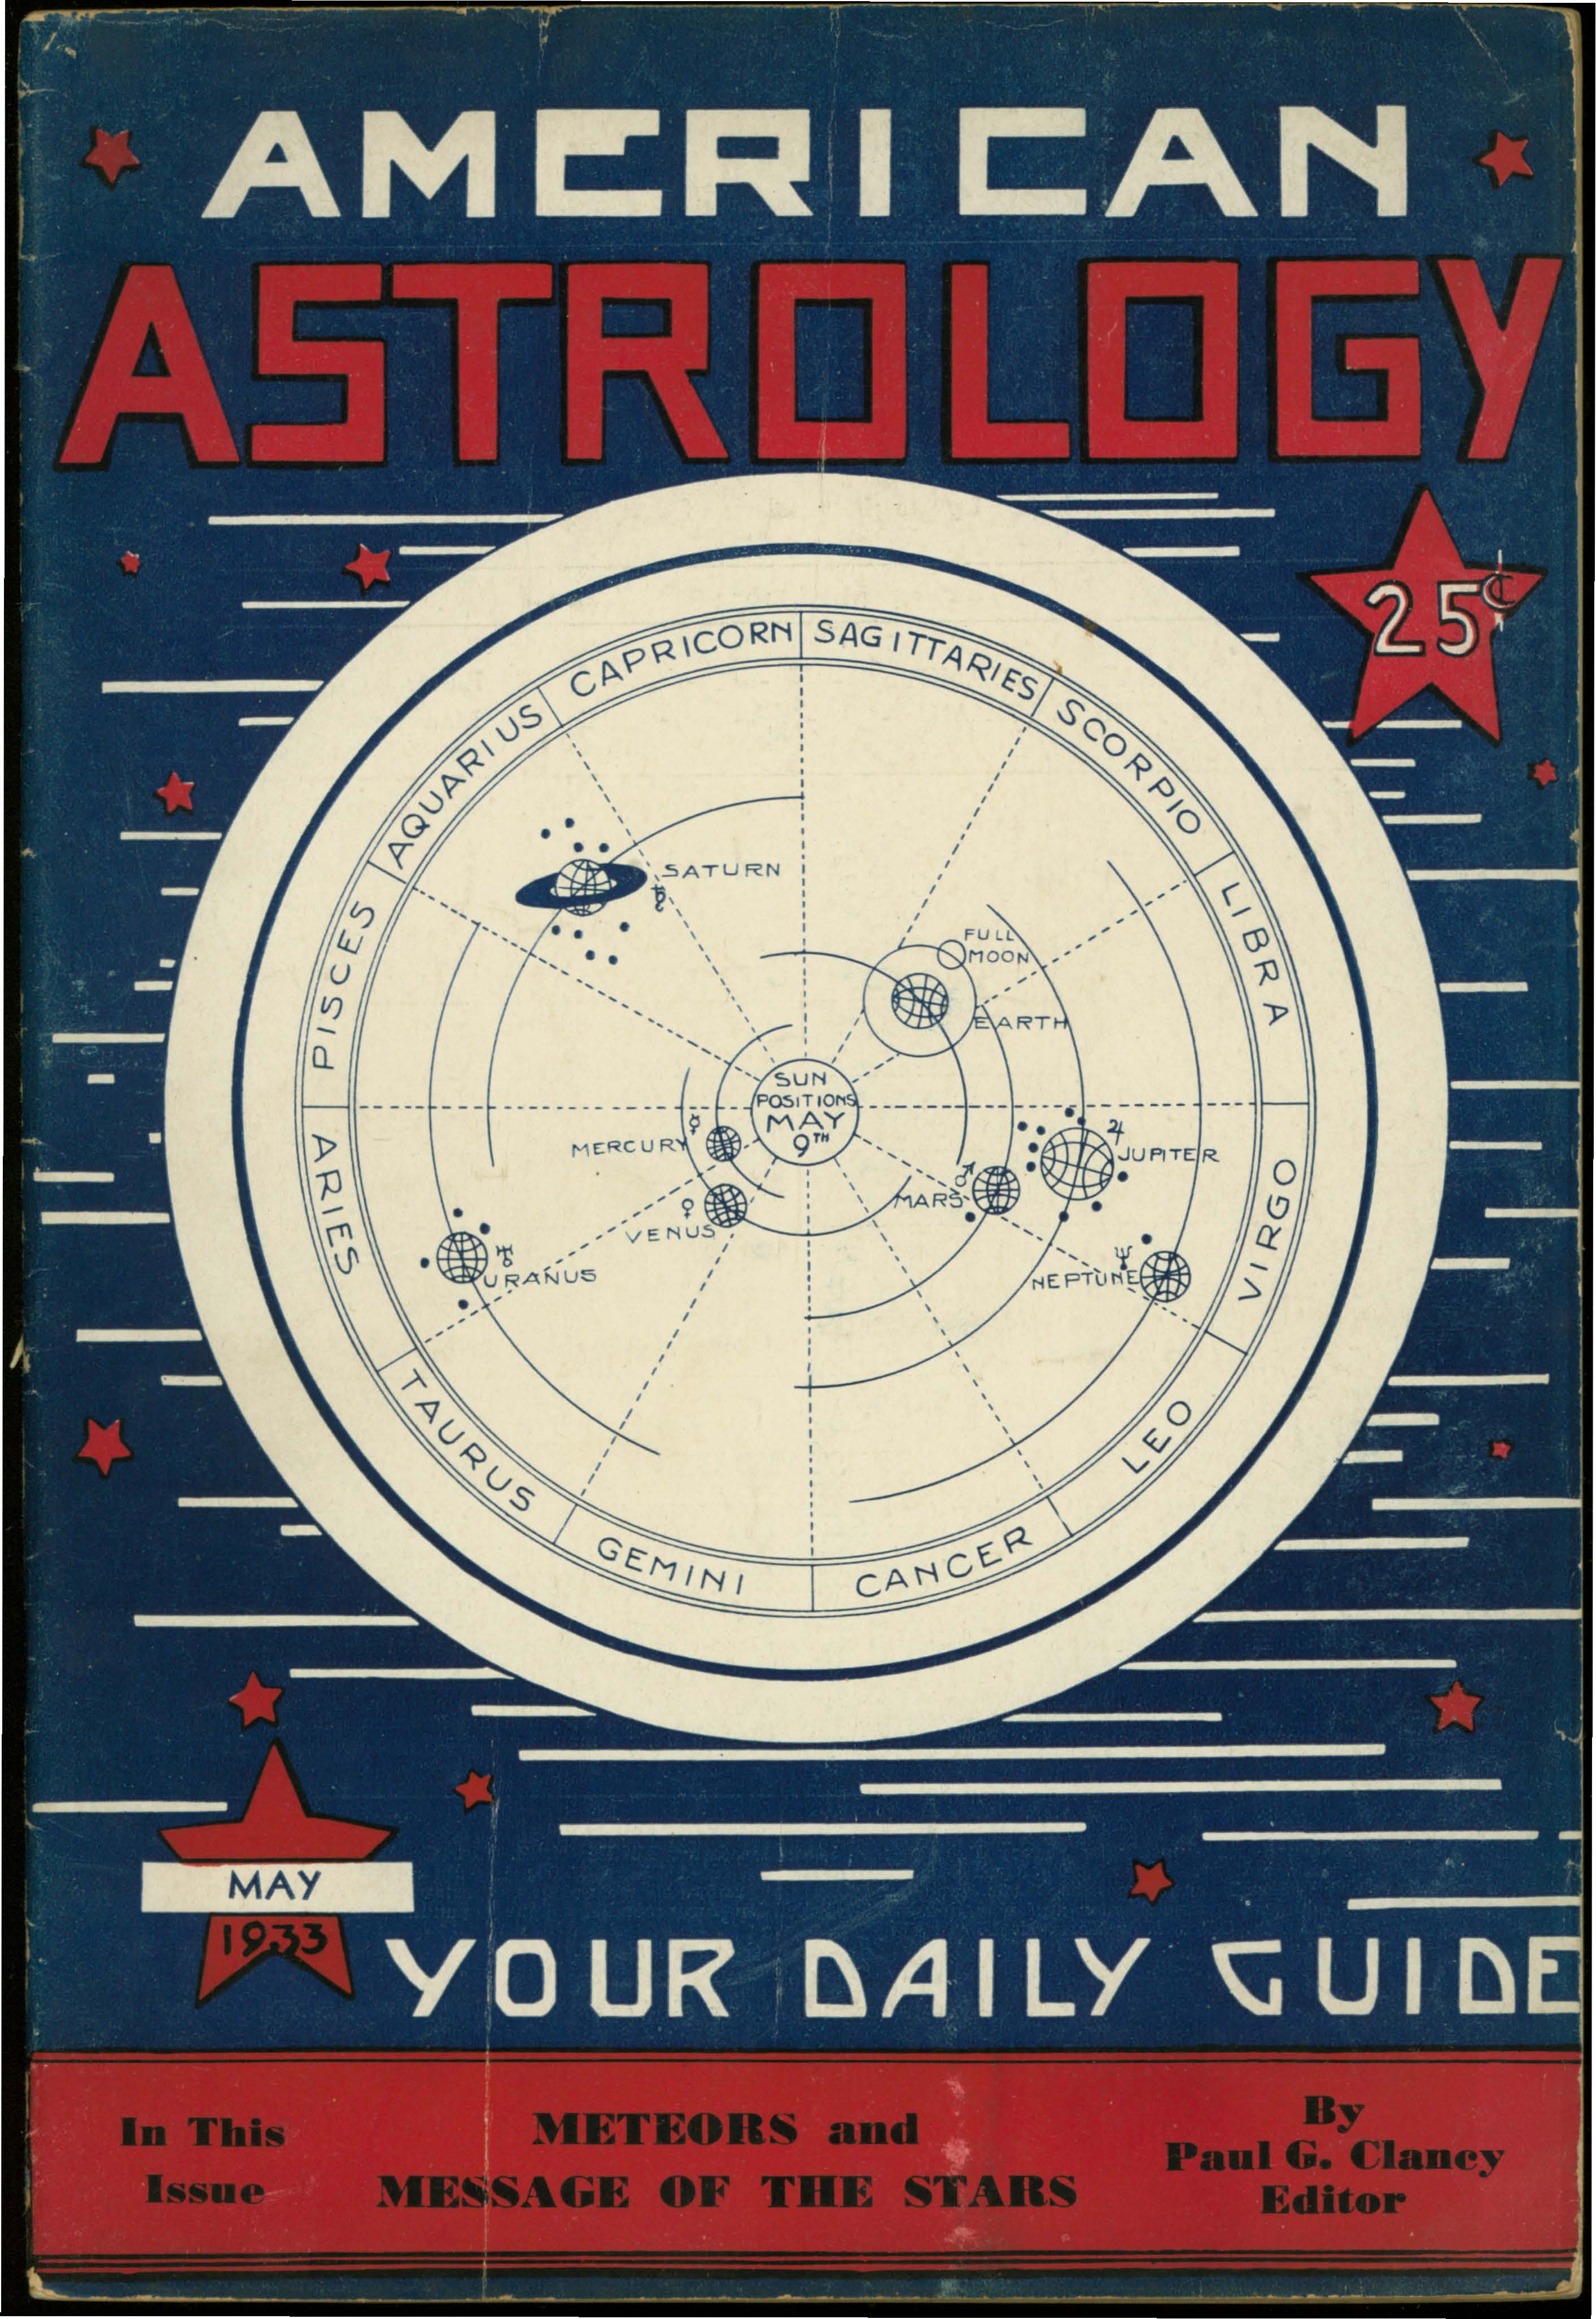 American Astrology 1933 covers_Page_1